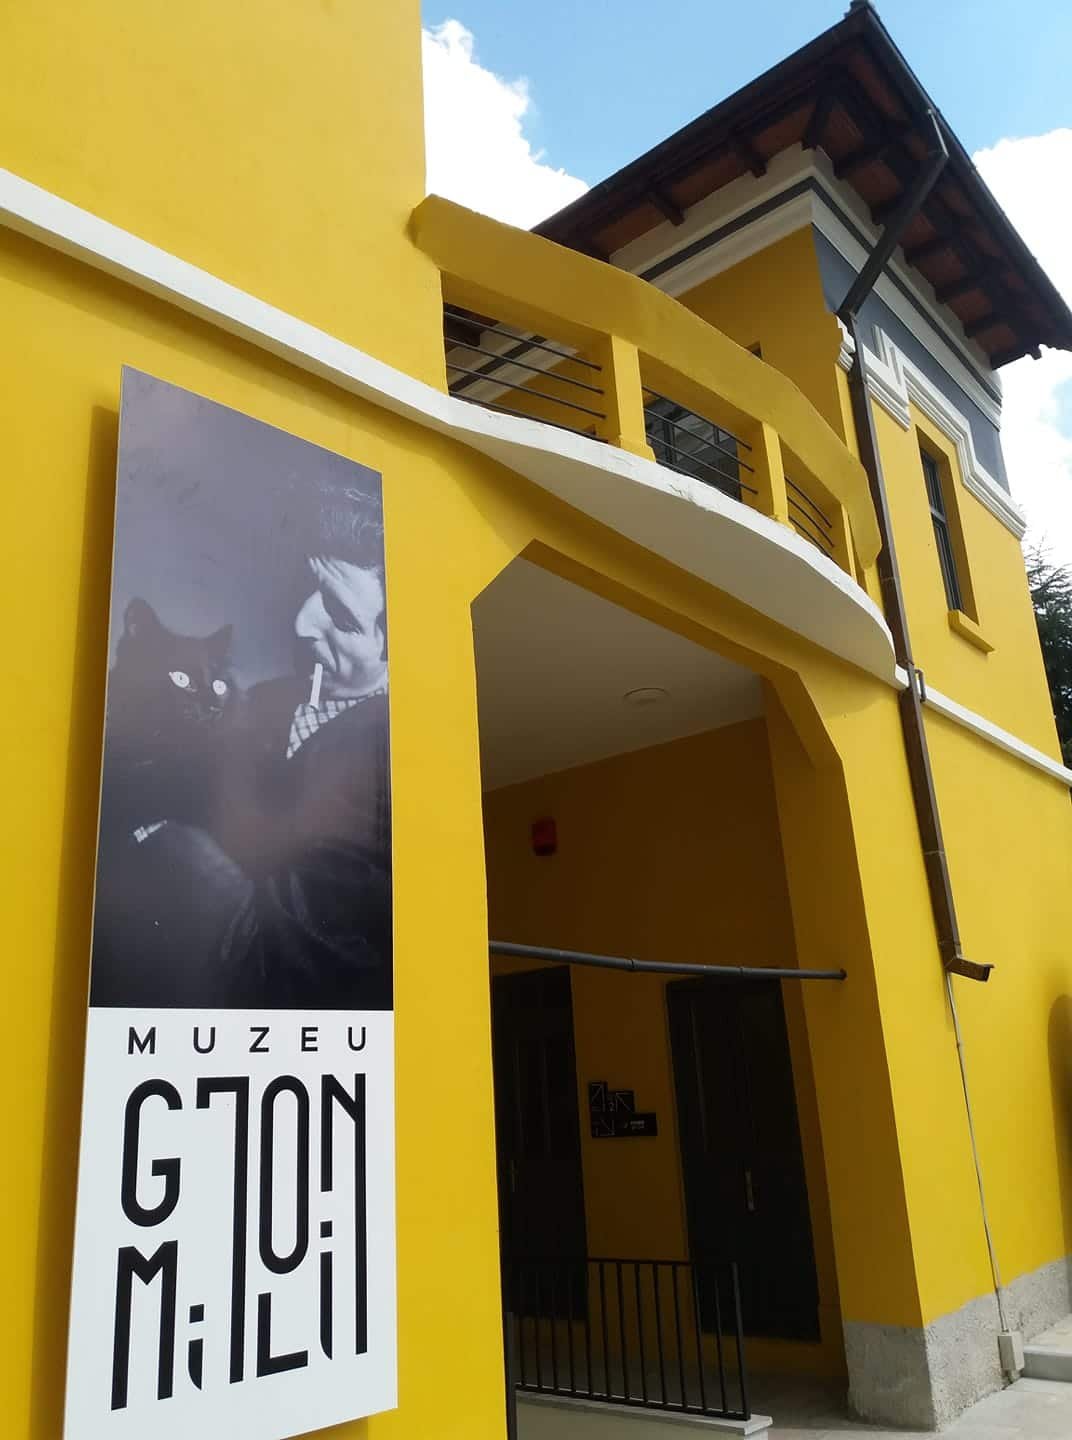 Gjon Mili museum - yellow building with a City Guide sign on it in Korçë, Albania.